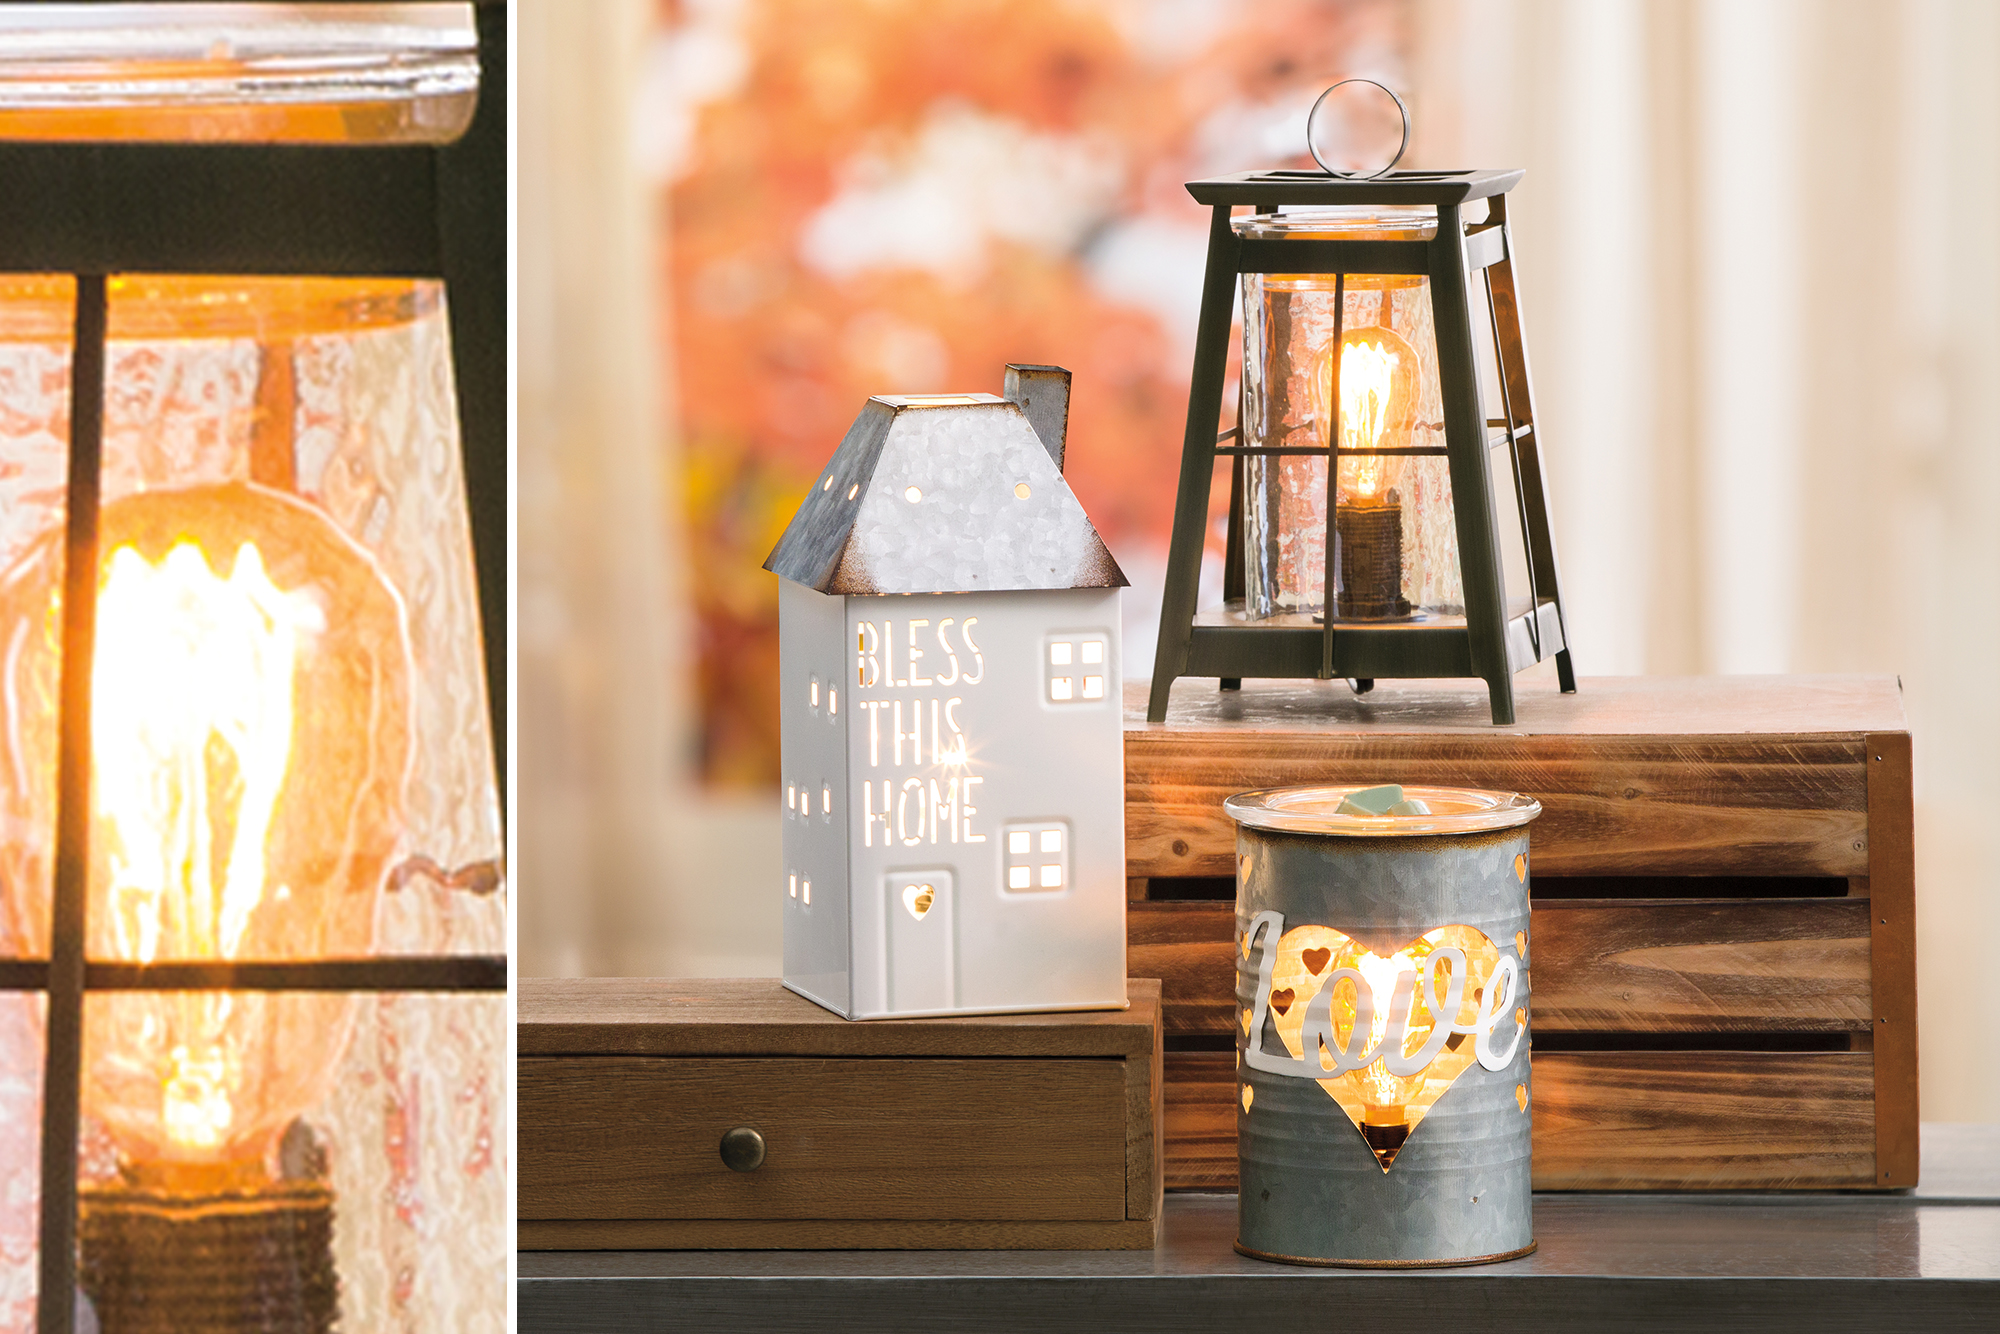 Scentsy warmers will make your farmhouse glow this fall